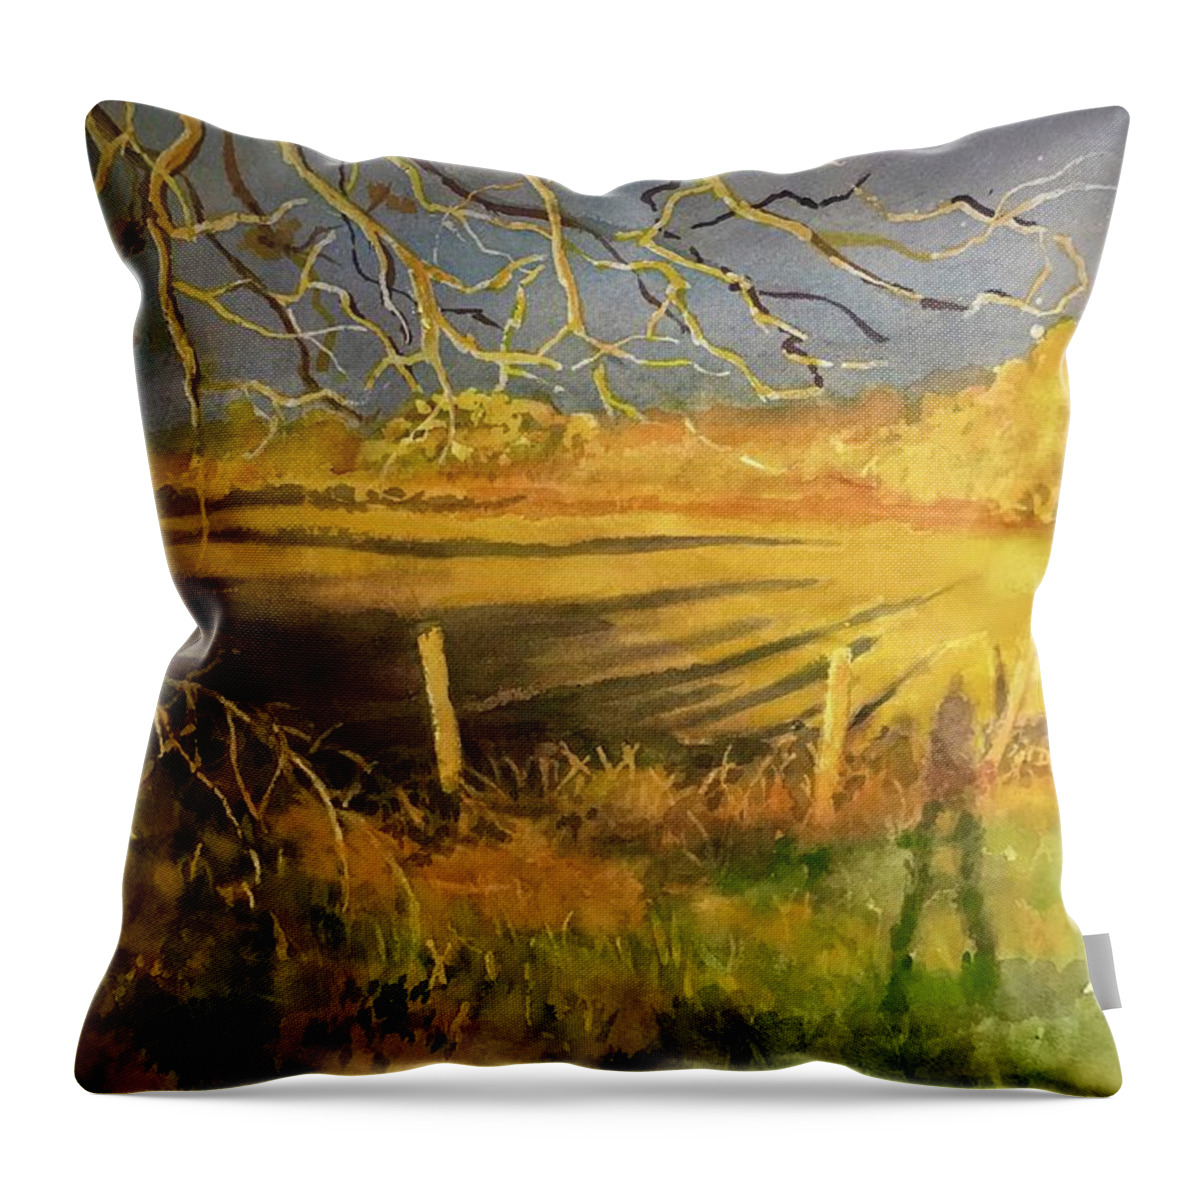 Aautumn Throw Pillow featuring the painting Autumn Field by Carolyn Epperly